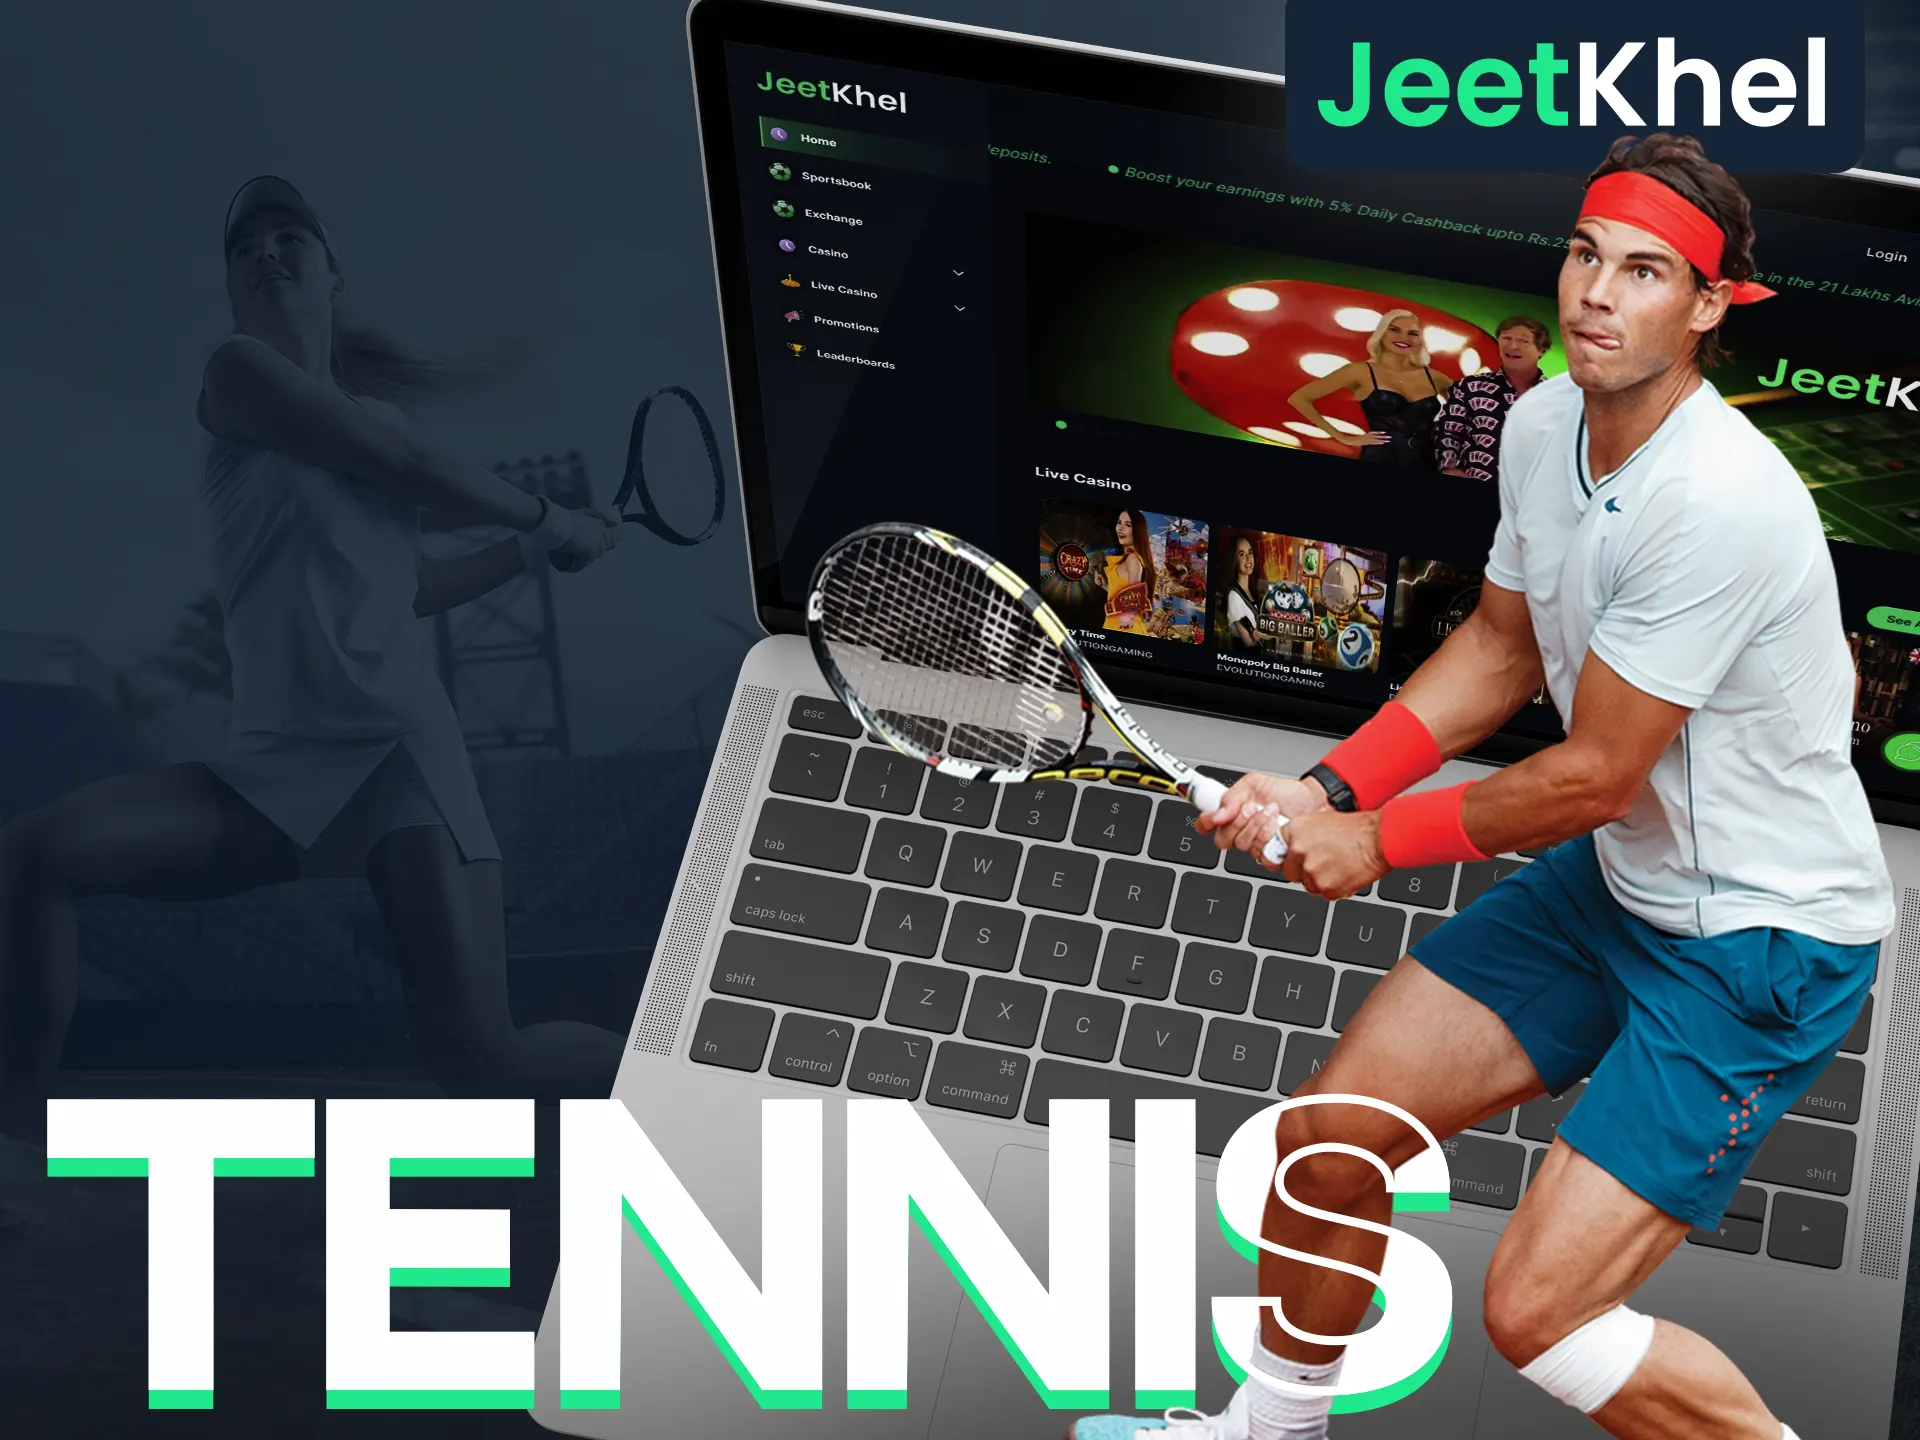 Place your tennis bets with Jeetkheel.